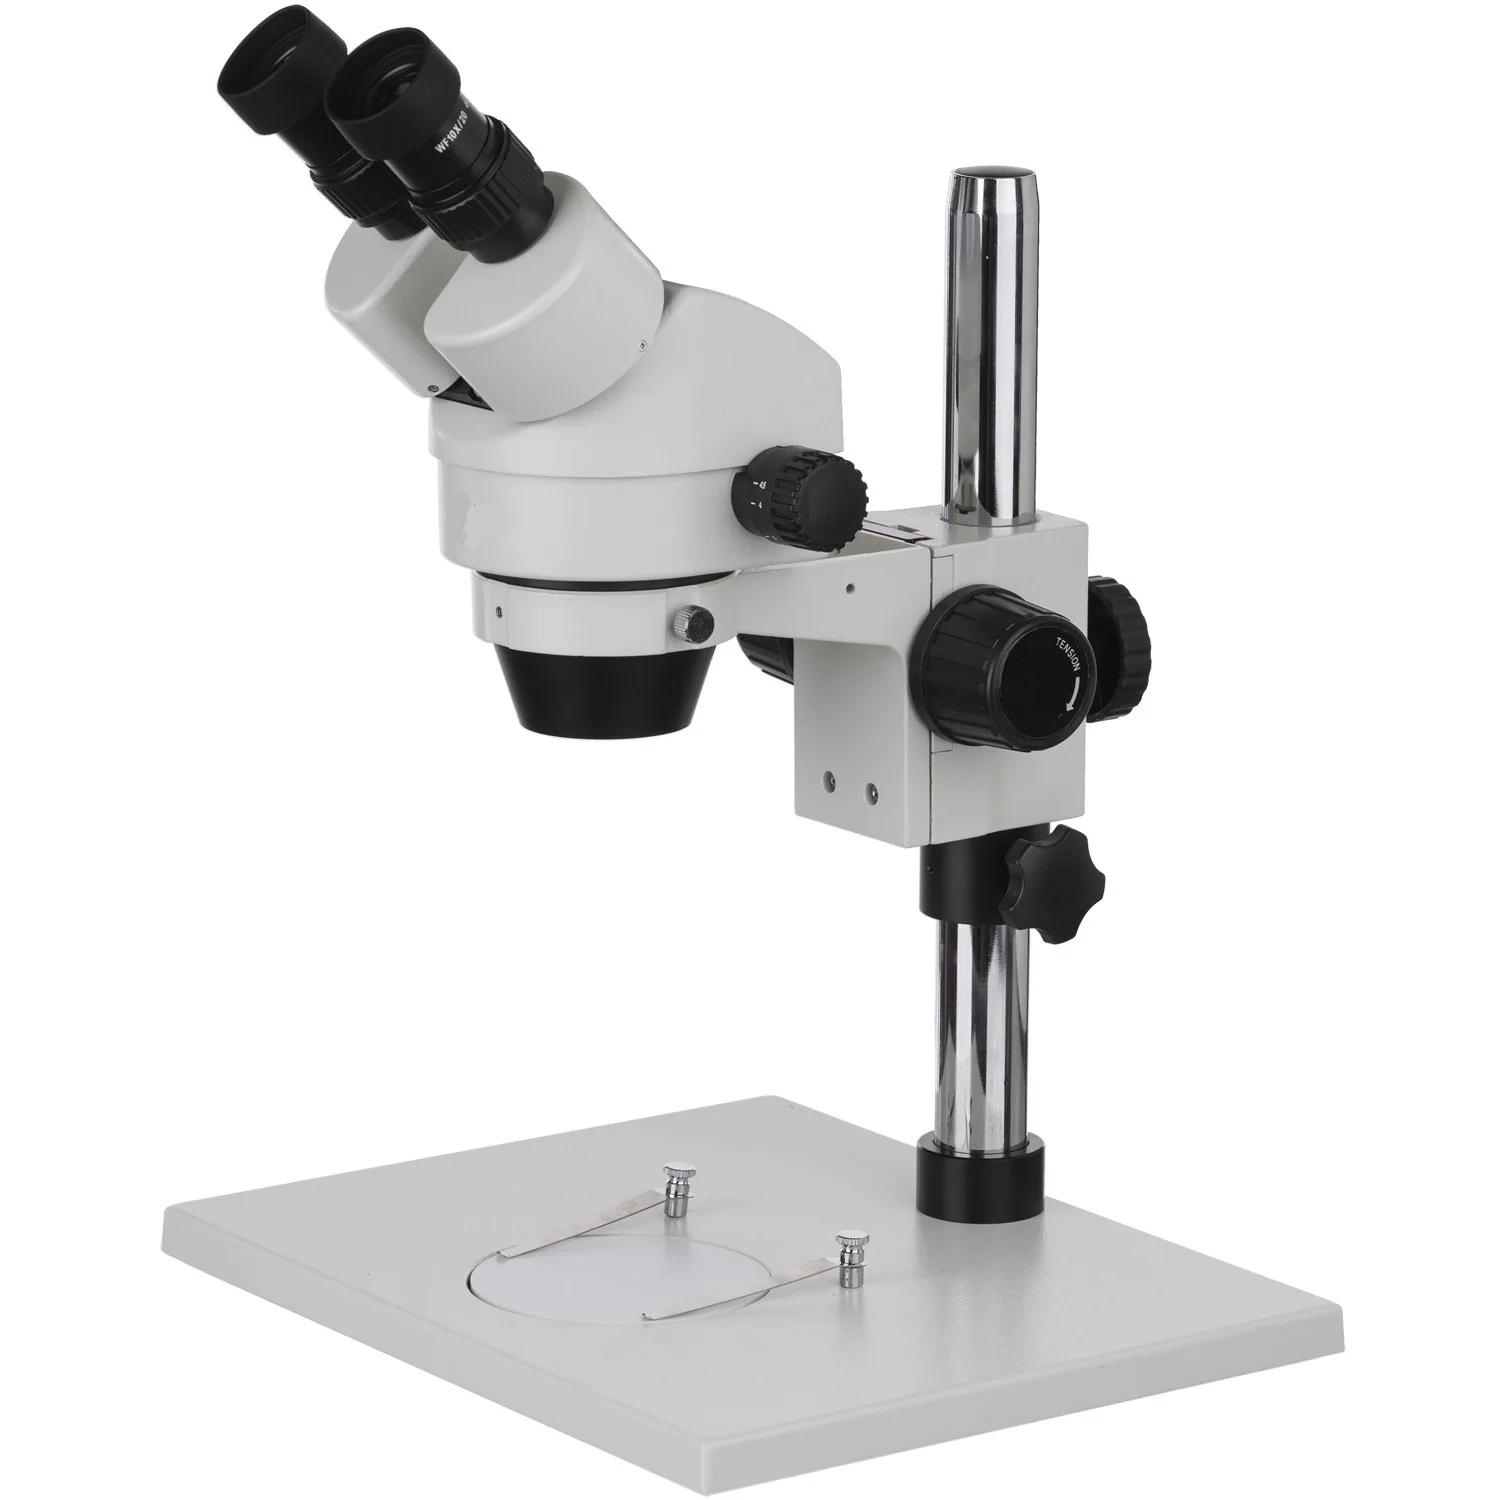 Tri-Power Stereo Microscope: 15X Widefield Eyepiece; 30X, 45X, 60X Magnification; LED Corded Illumination